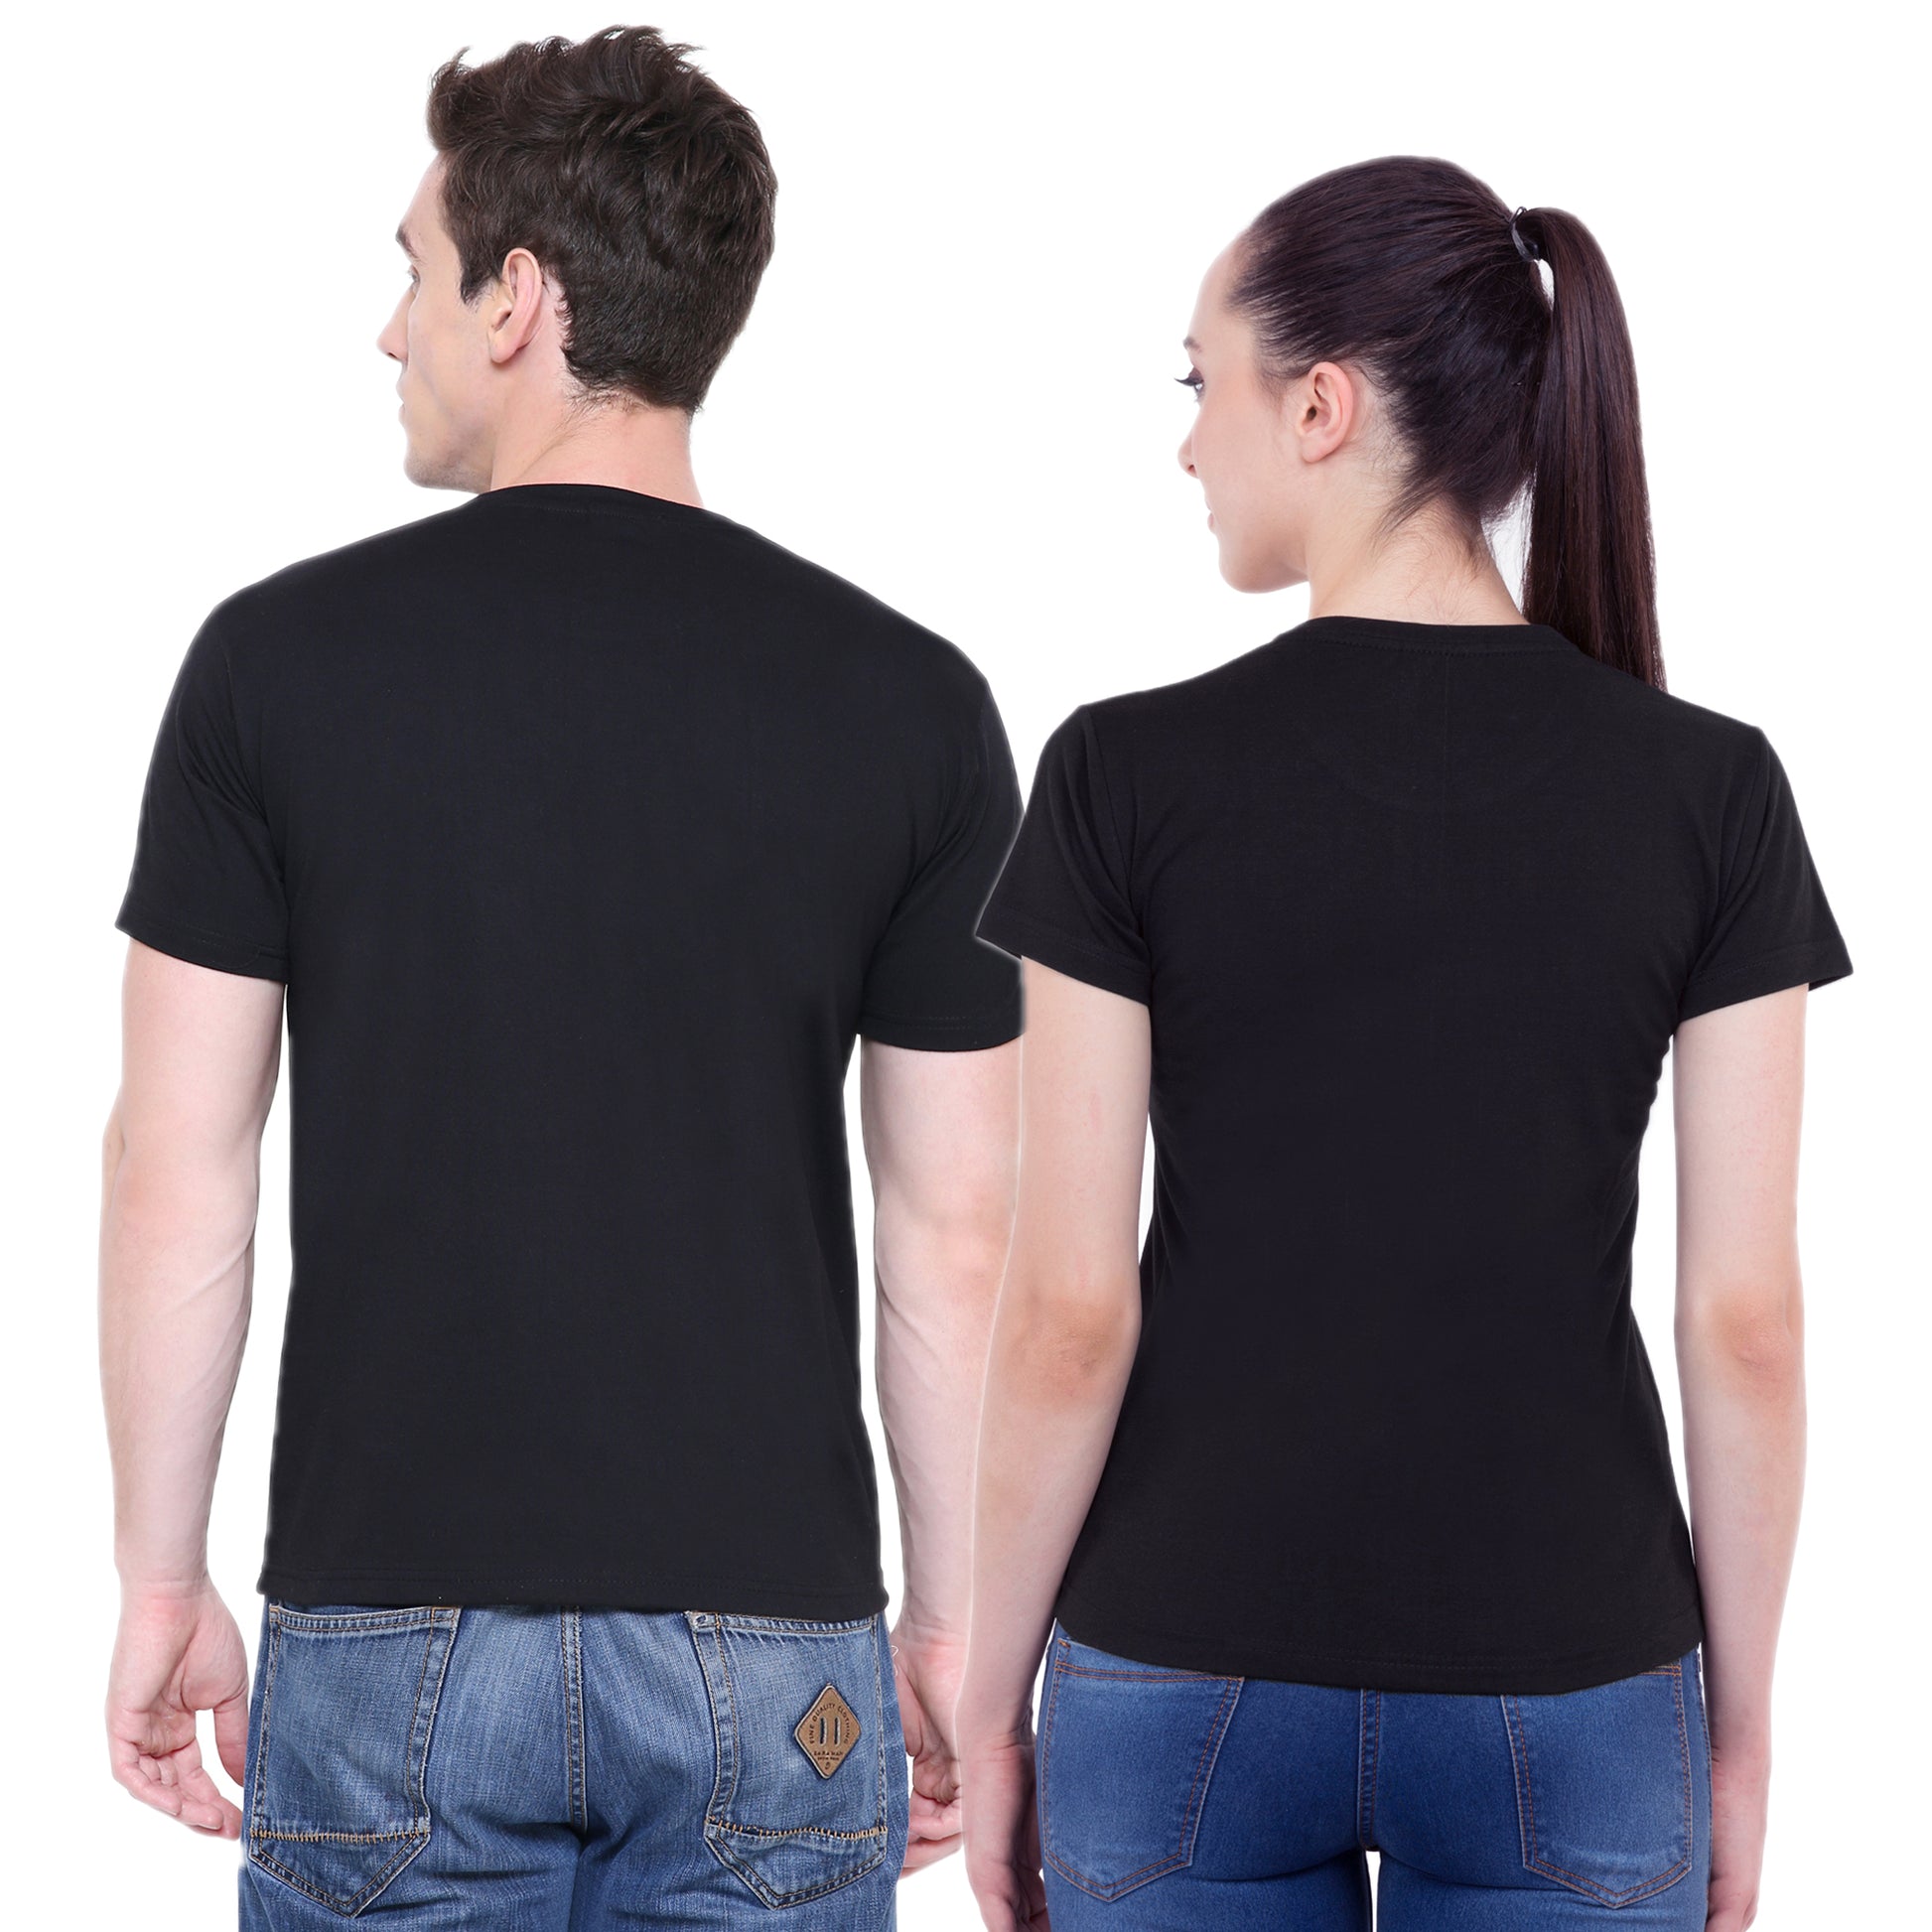 Love Quote matching Couple T shirts- Black